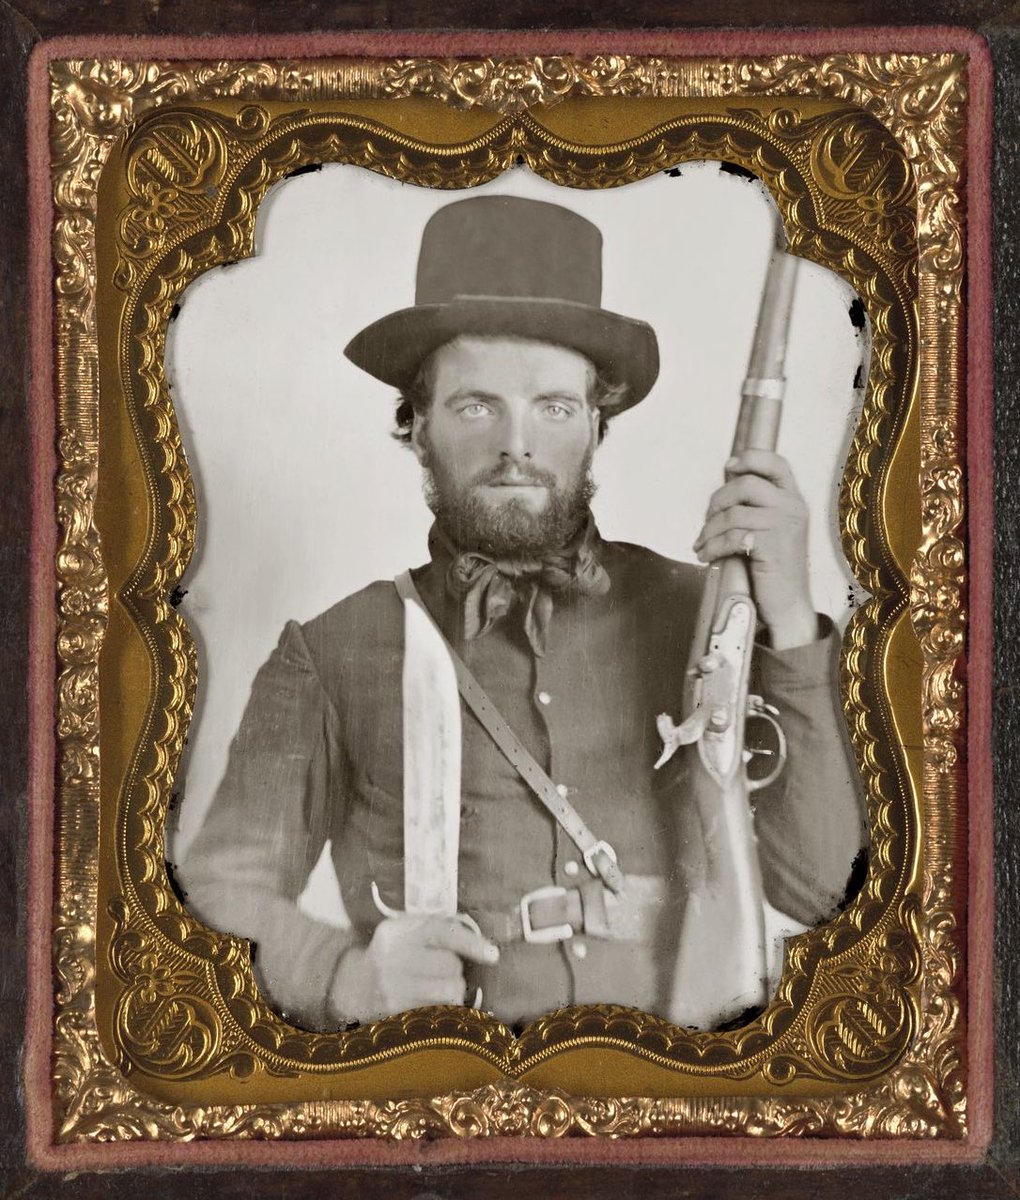 Private Stanford Lea Jessee of the 29th VA infantry.